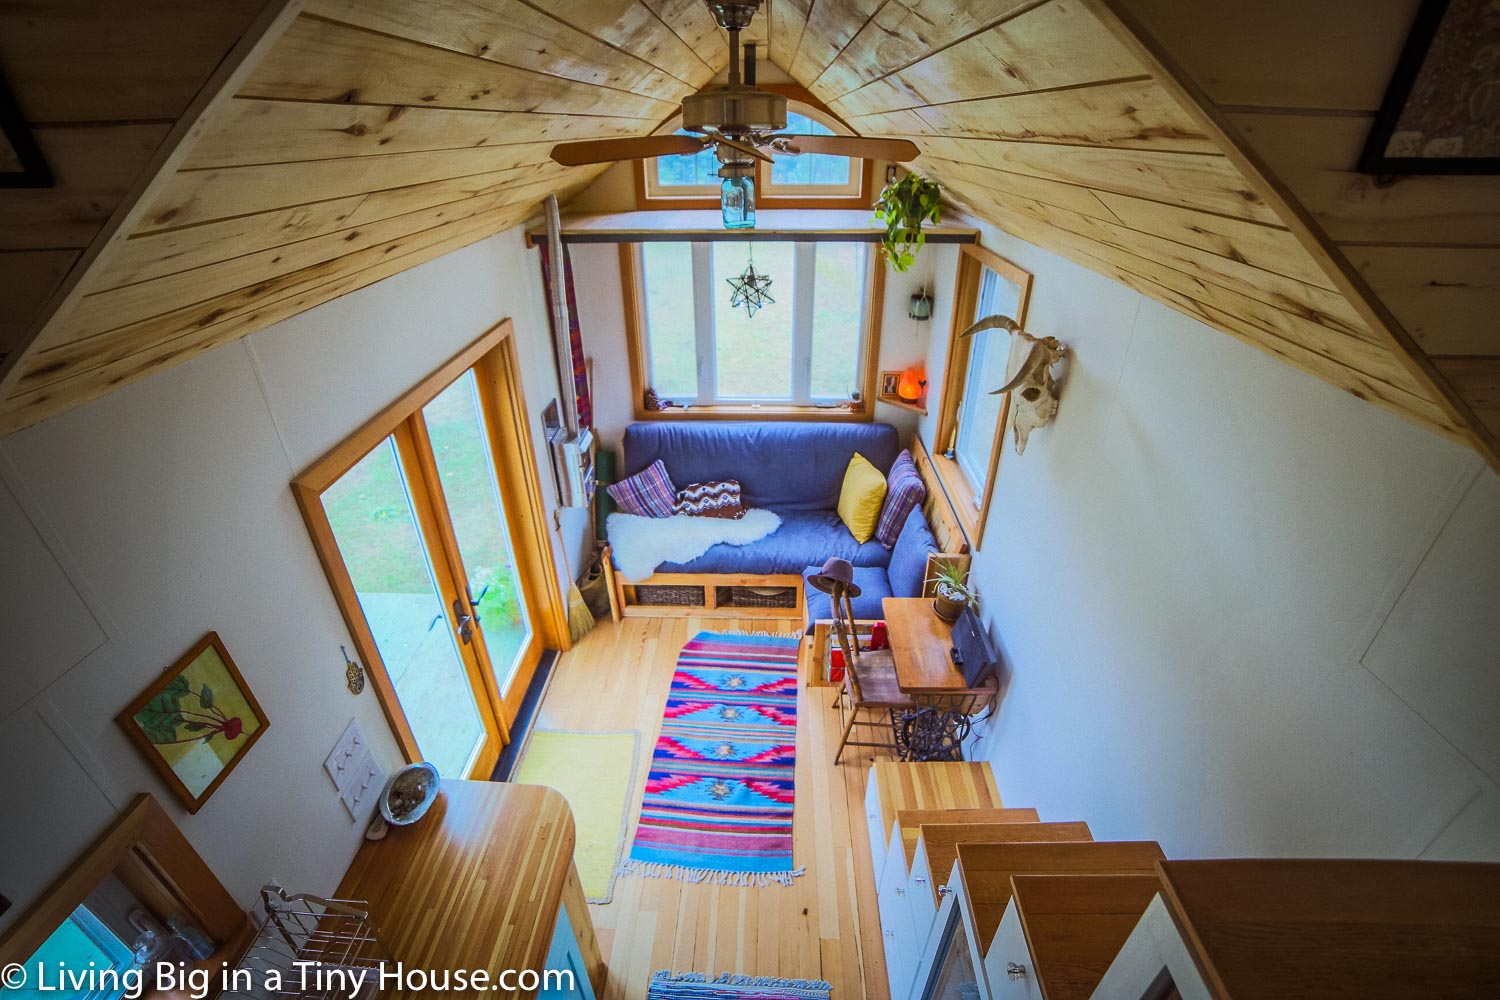 Packing big design in tiny homes